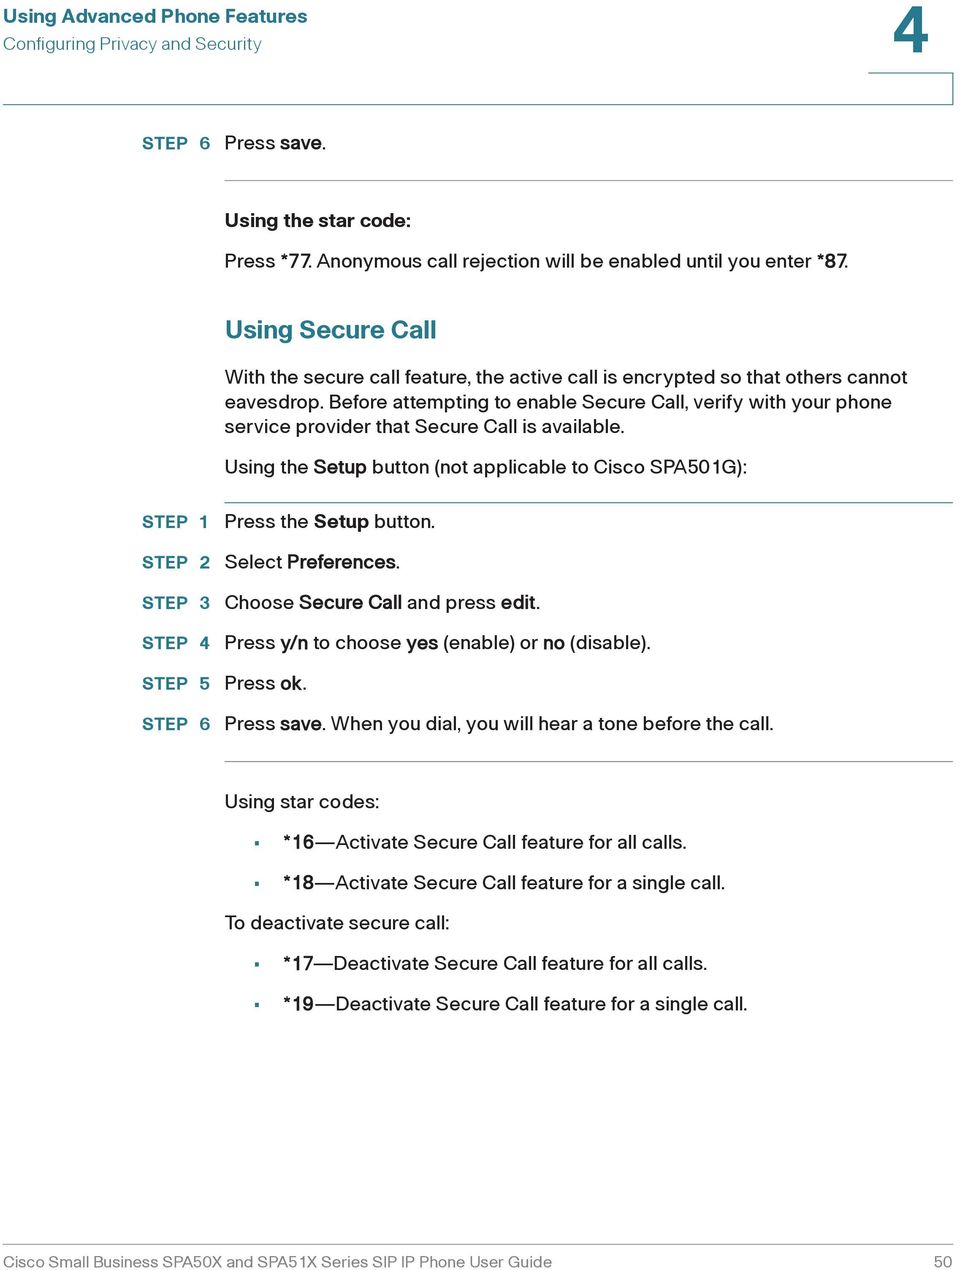 Before attempting to enable Secure Call, verify with your phone service provider that Secure Call is available.